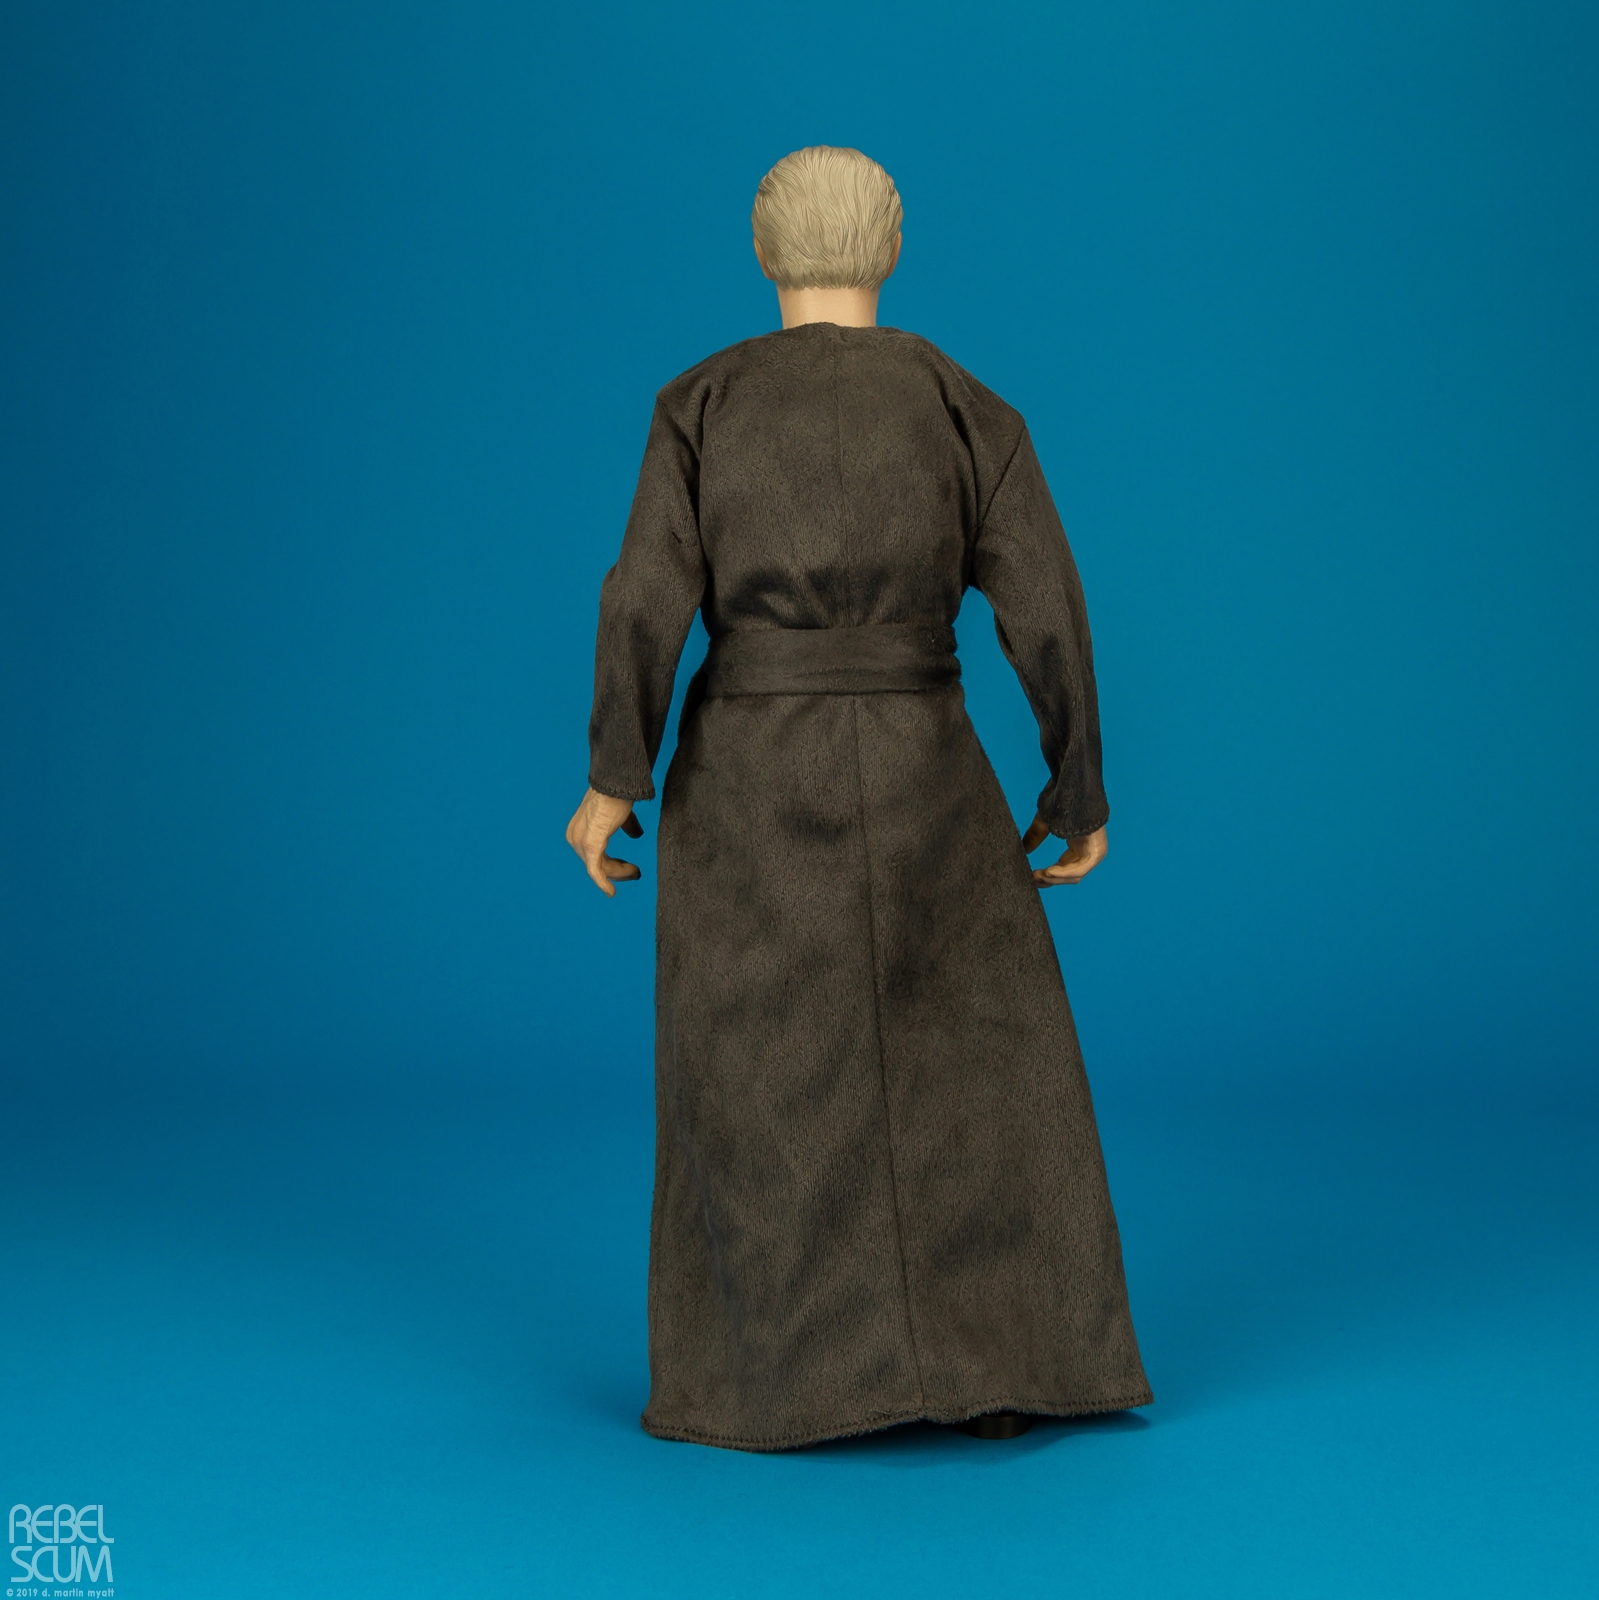 Emperor-Palpatine-Deluxe-Version-MMS468-Hot-Toys-016.jpg